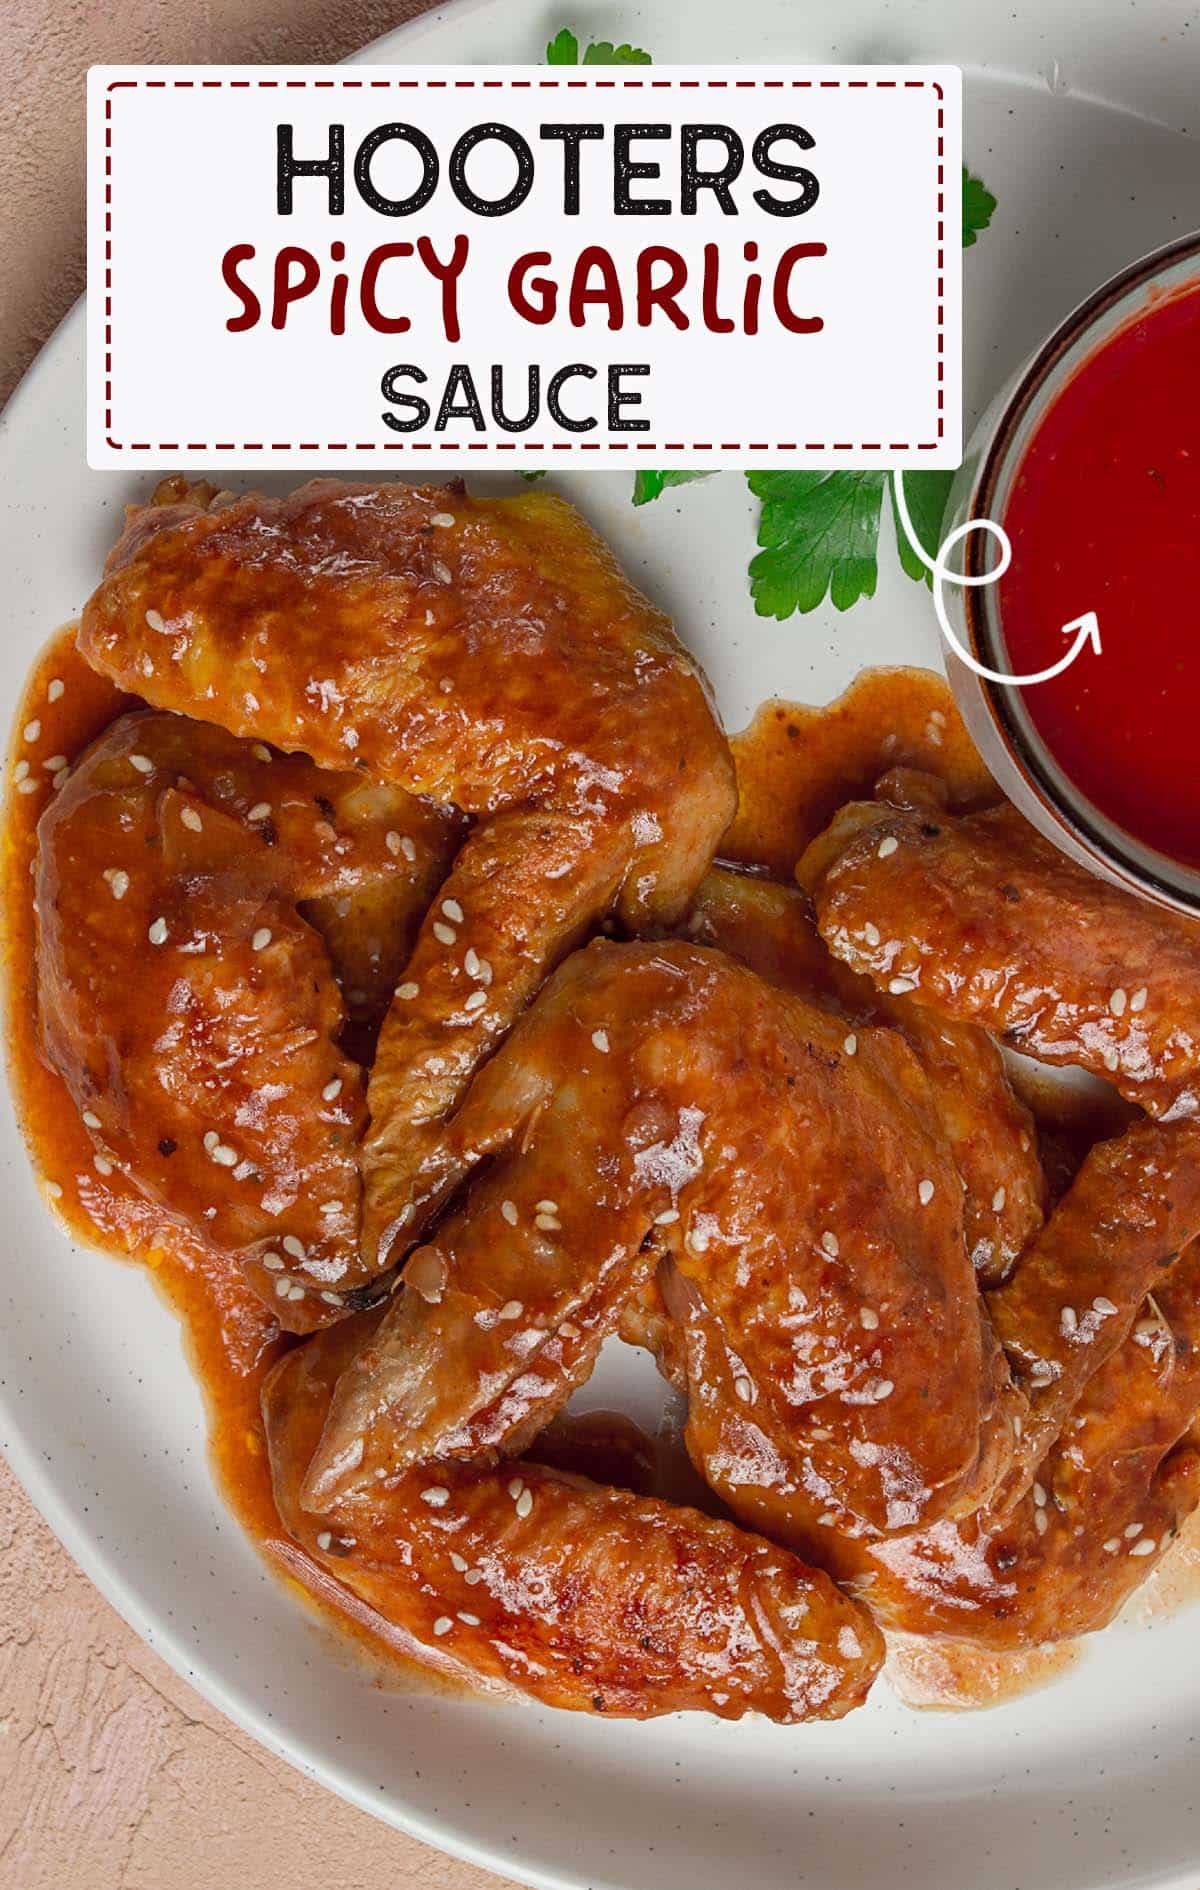 Unleash bold flavors with this Hooters Spicy Garlic Sauce recipe! Master the art of recreating this zesty, crowd-pleasing sauce at home for unforgettable wings, dips, and more.